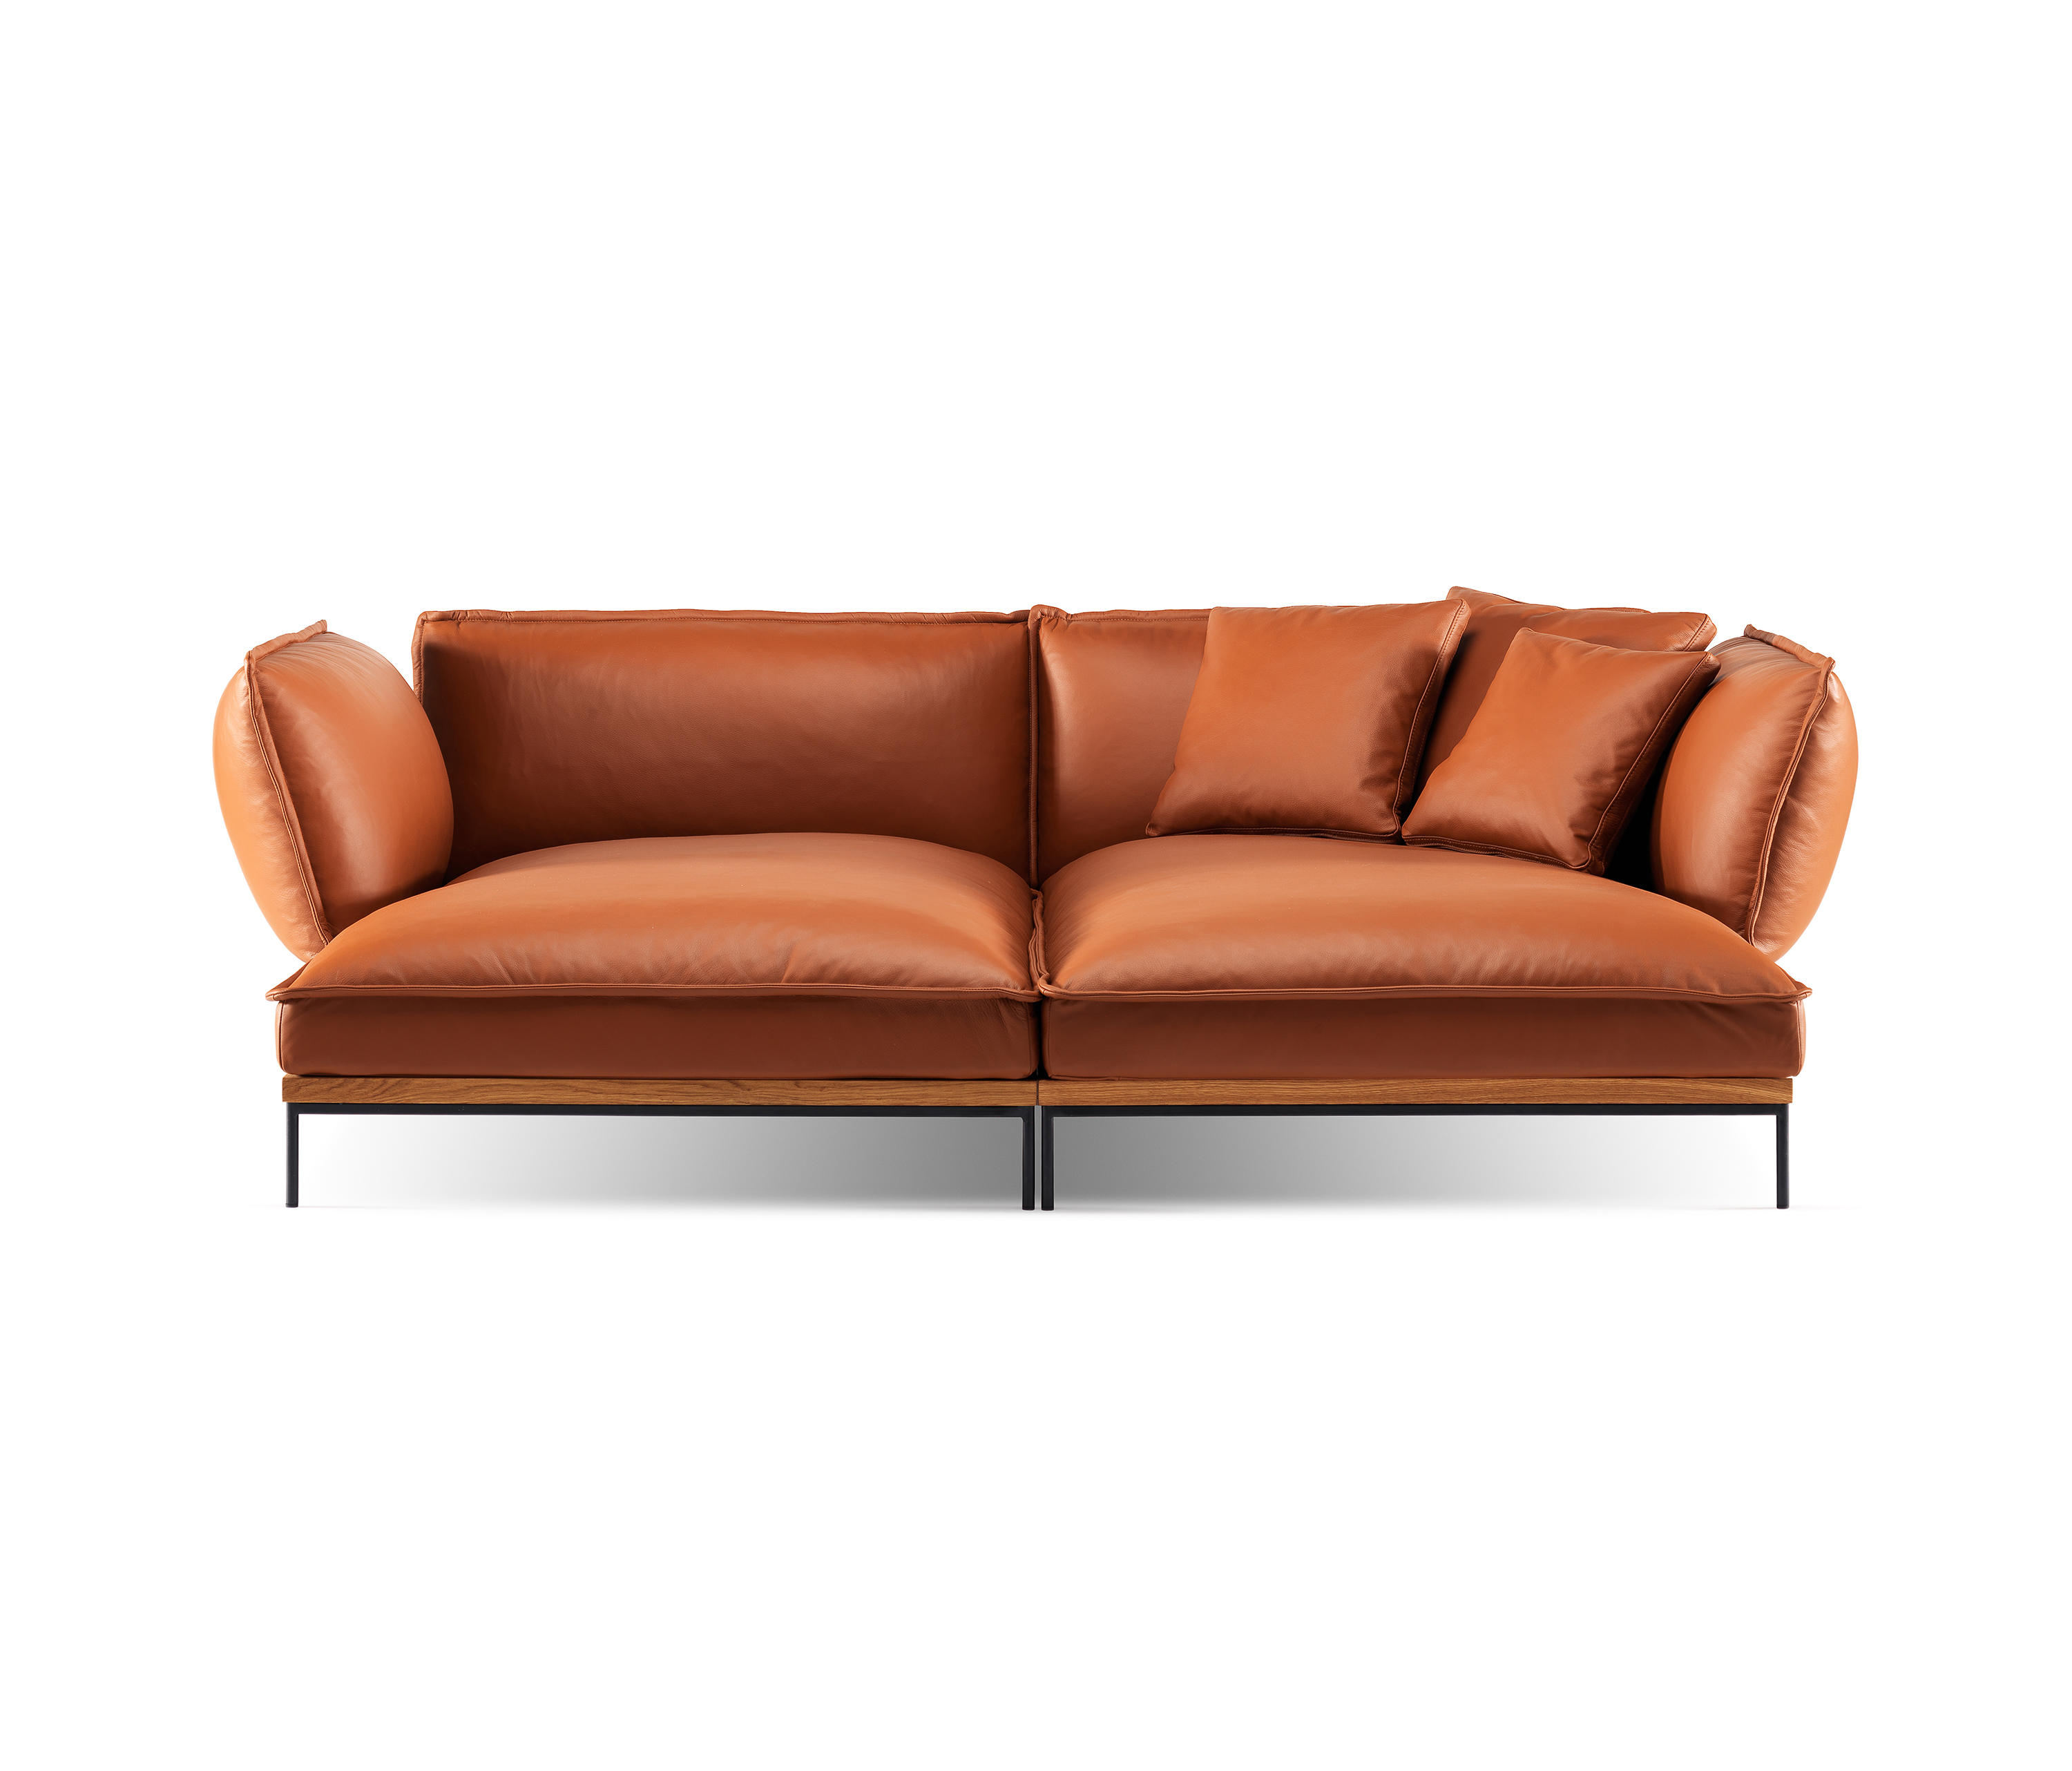 Jord Double Chaise Lounge Architonic, Double Leather Chaise Lounge